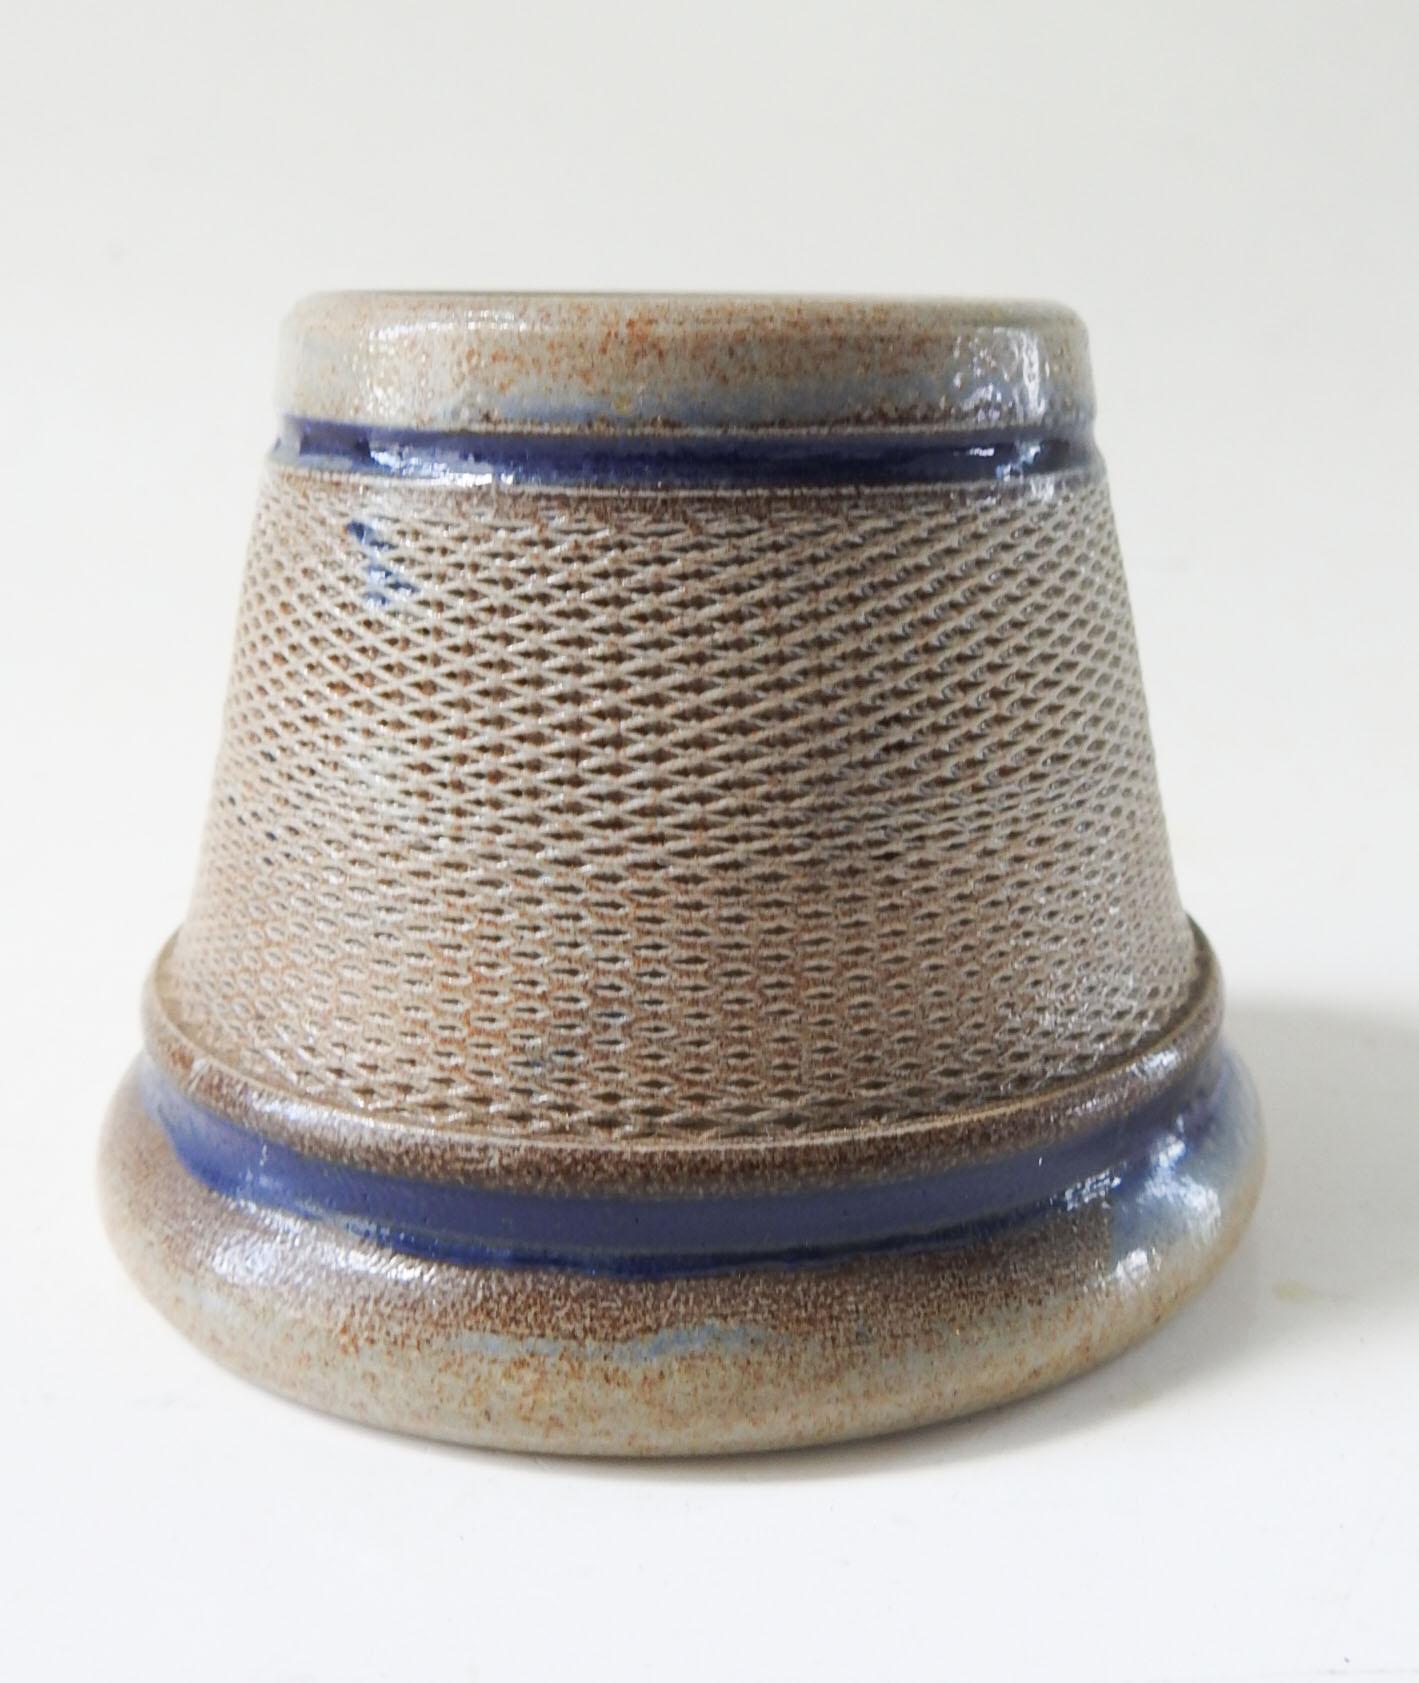 Vintage stoneware salt glaze gray and blue pottery match striker and holder.  No markings, very good condition.